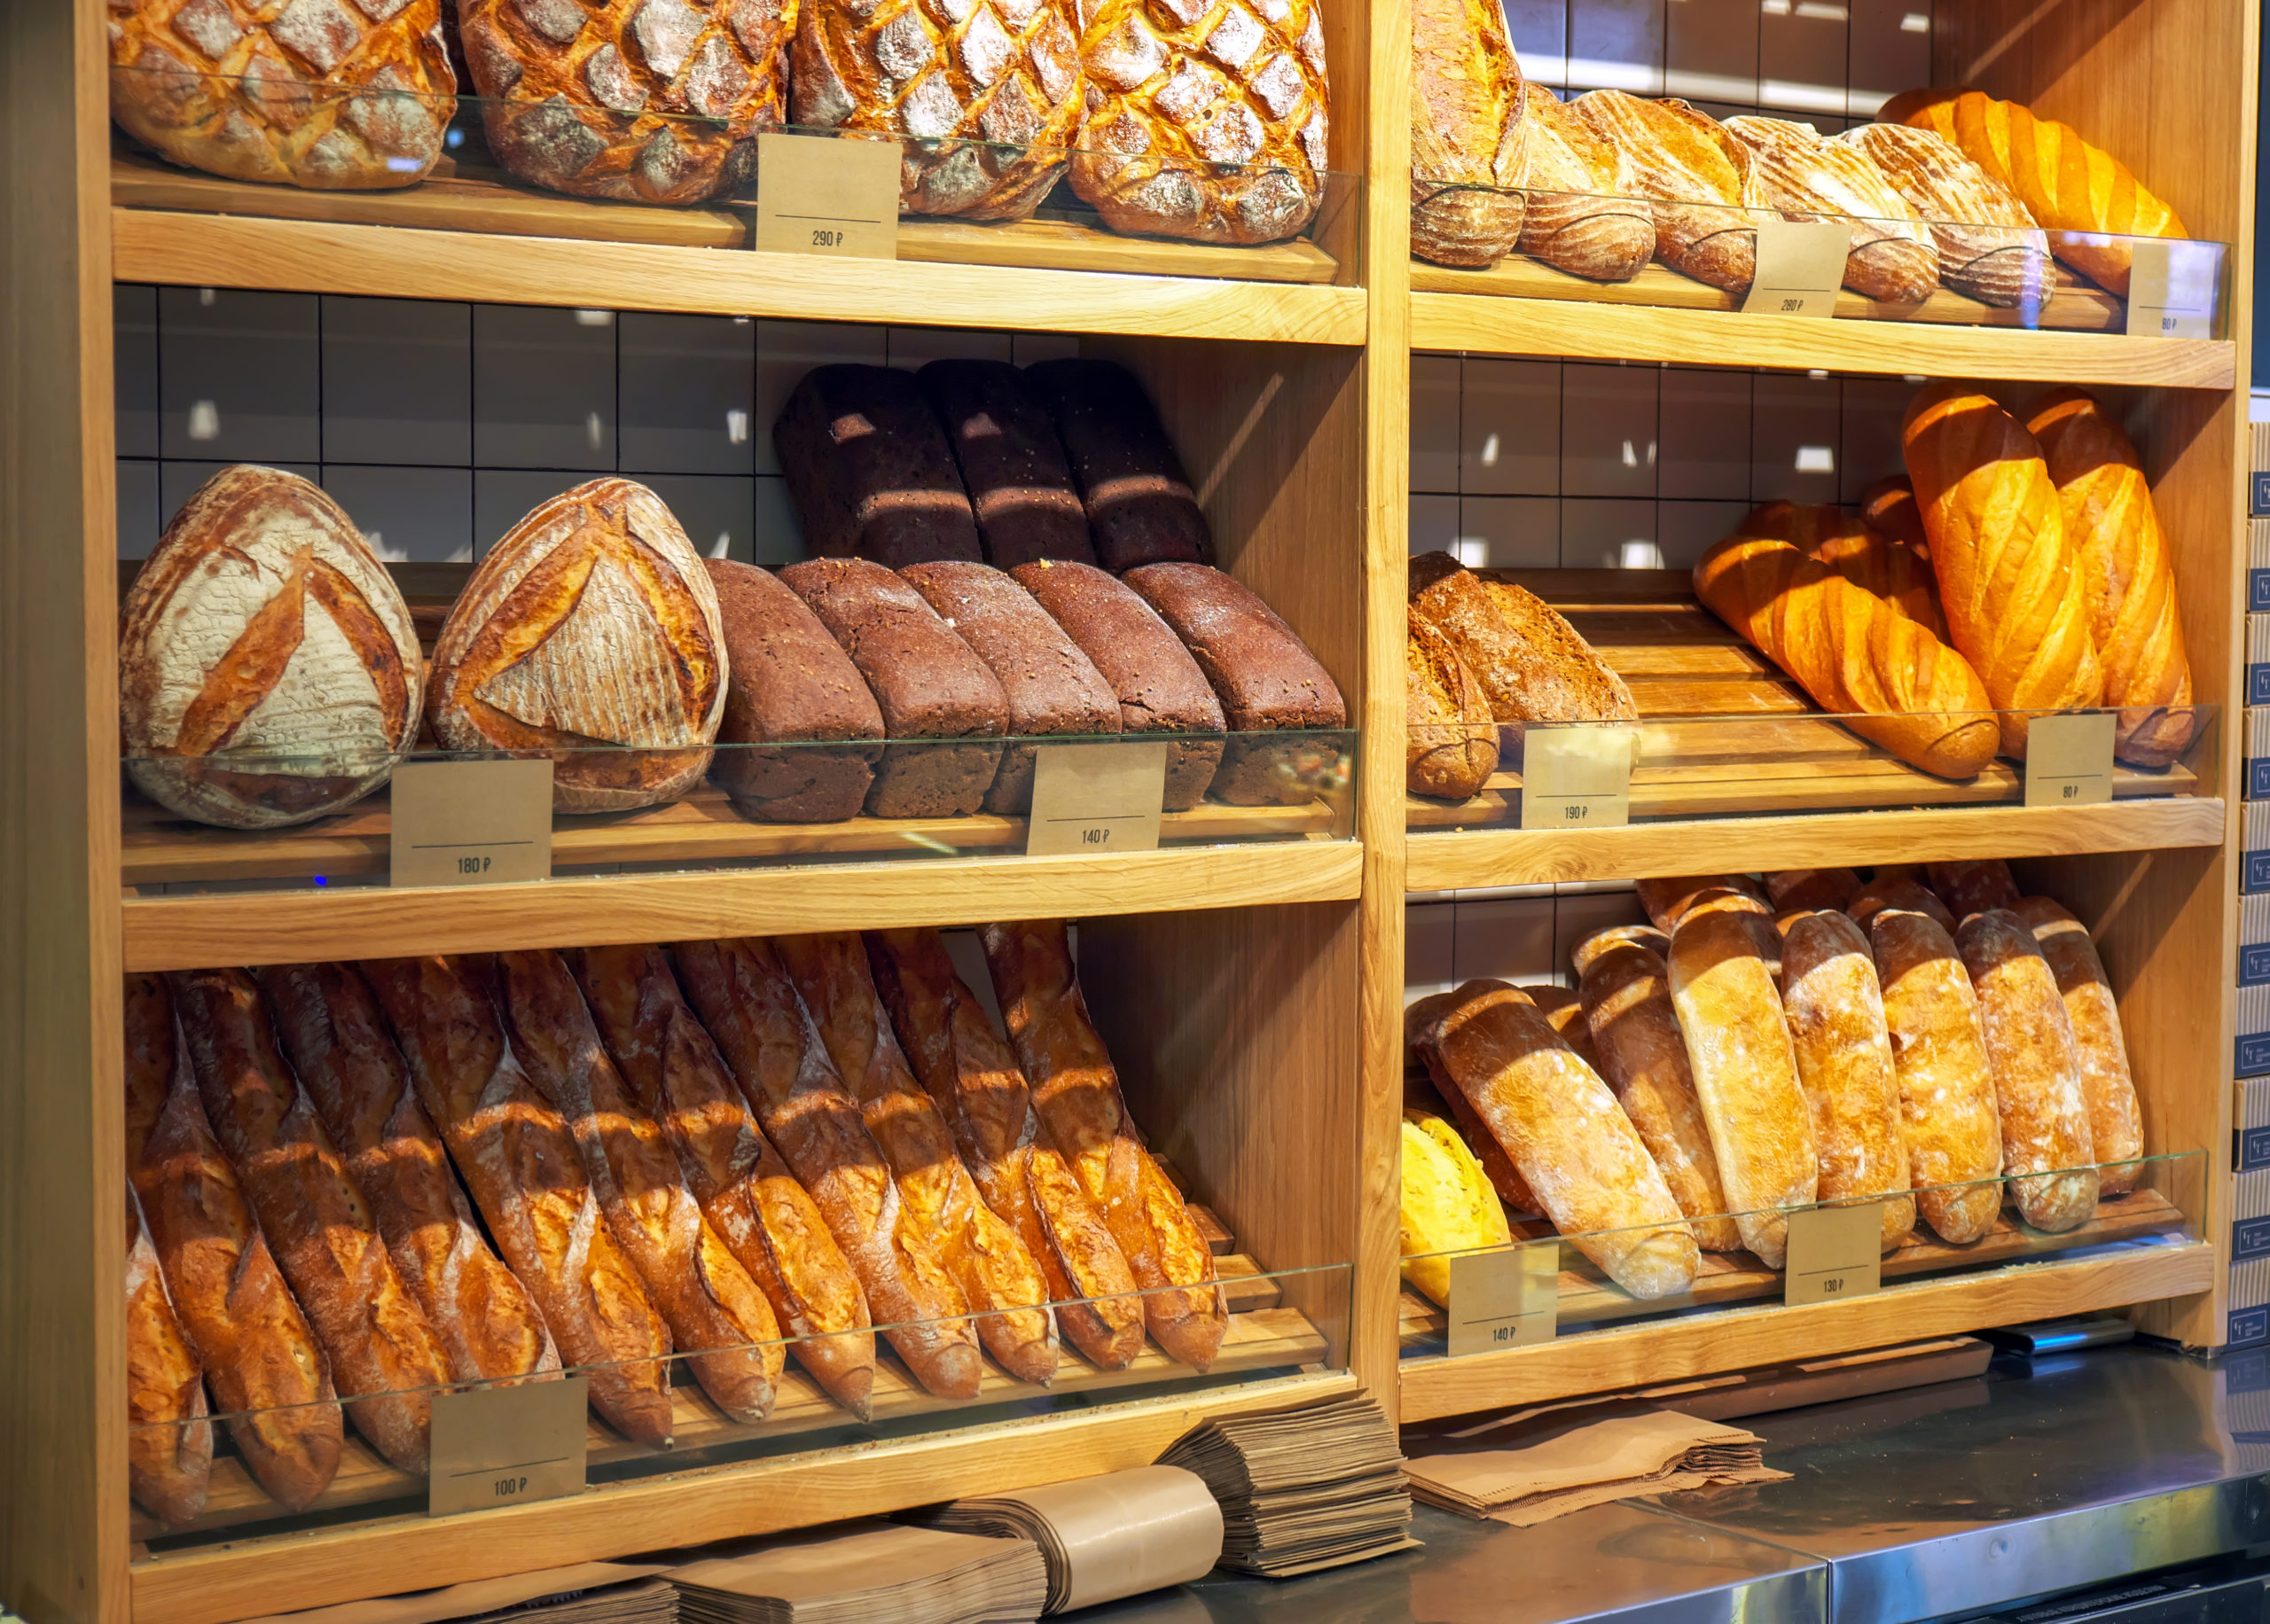 Bakeries adjust to new marketplace during the pandemic